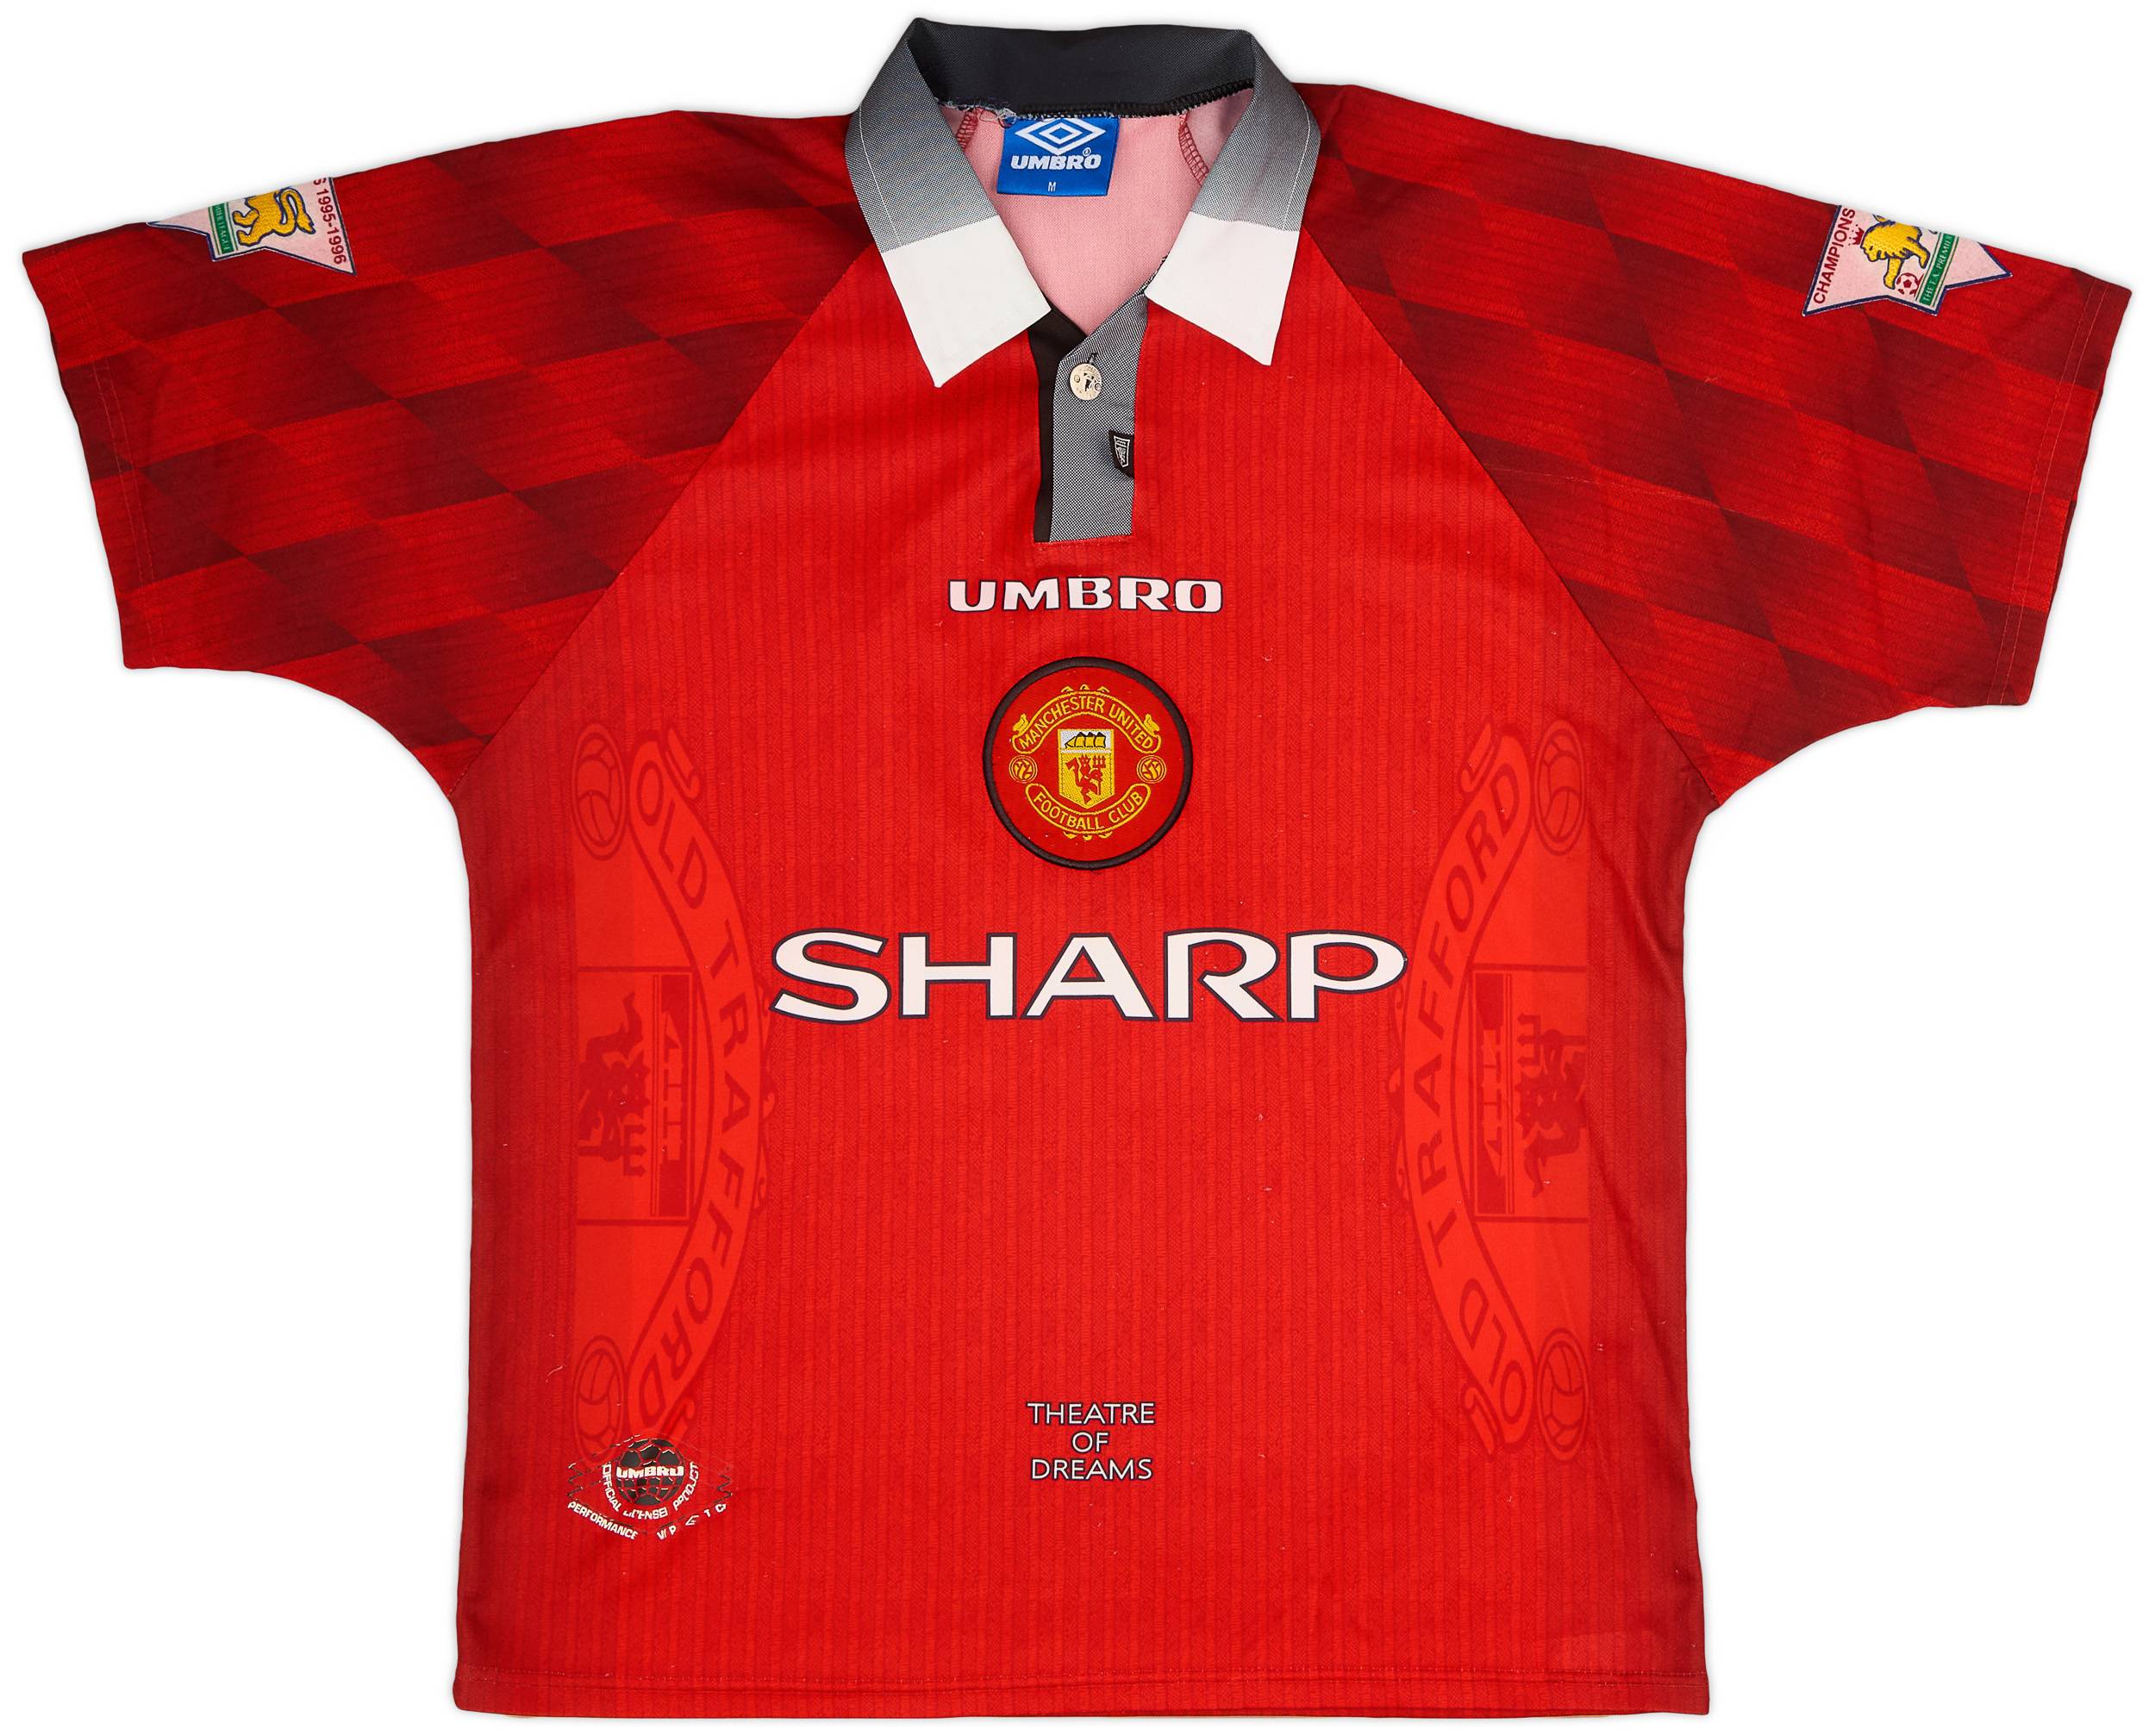 1996-98 Manchester United Home Shirt #10 - 8/10 - (M)